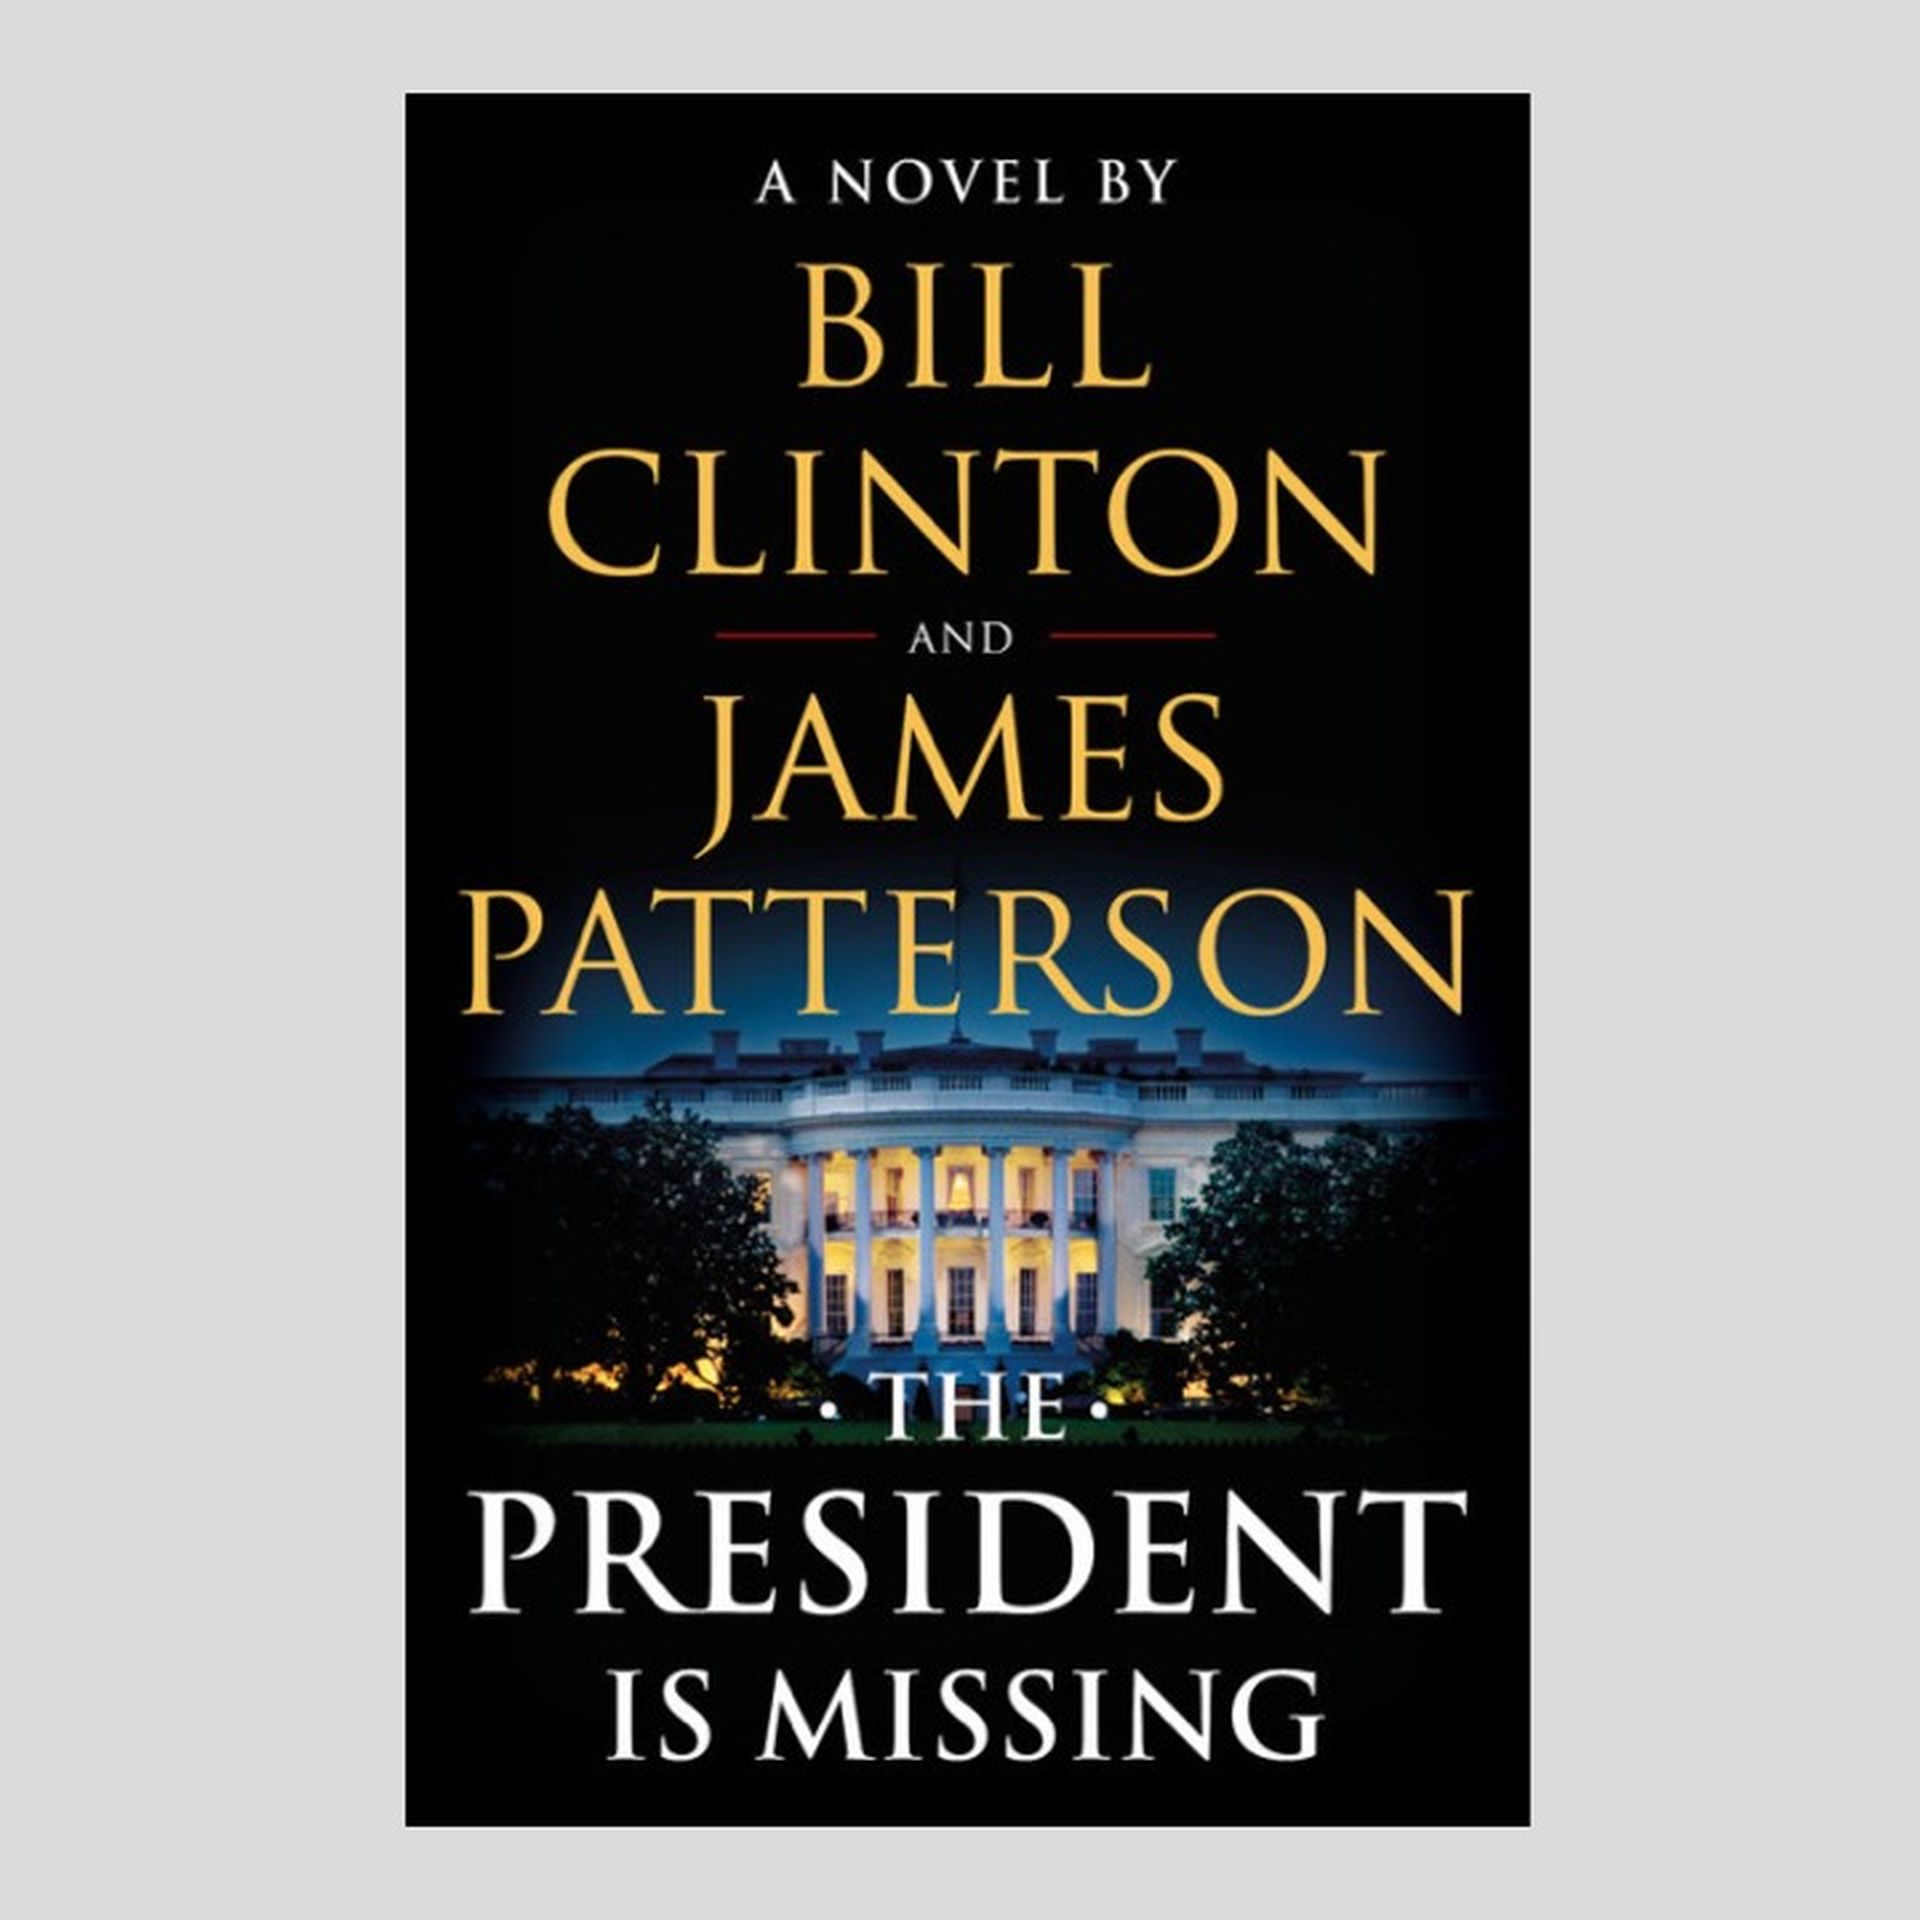 Bill Clinton and James Patterson's book, The President is Missing